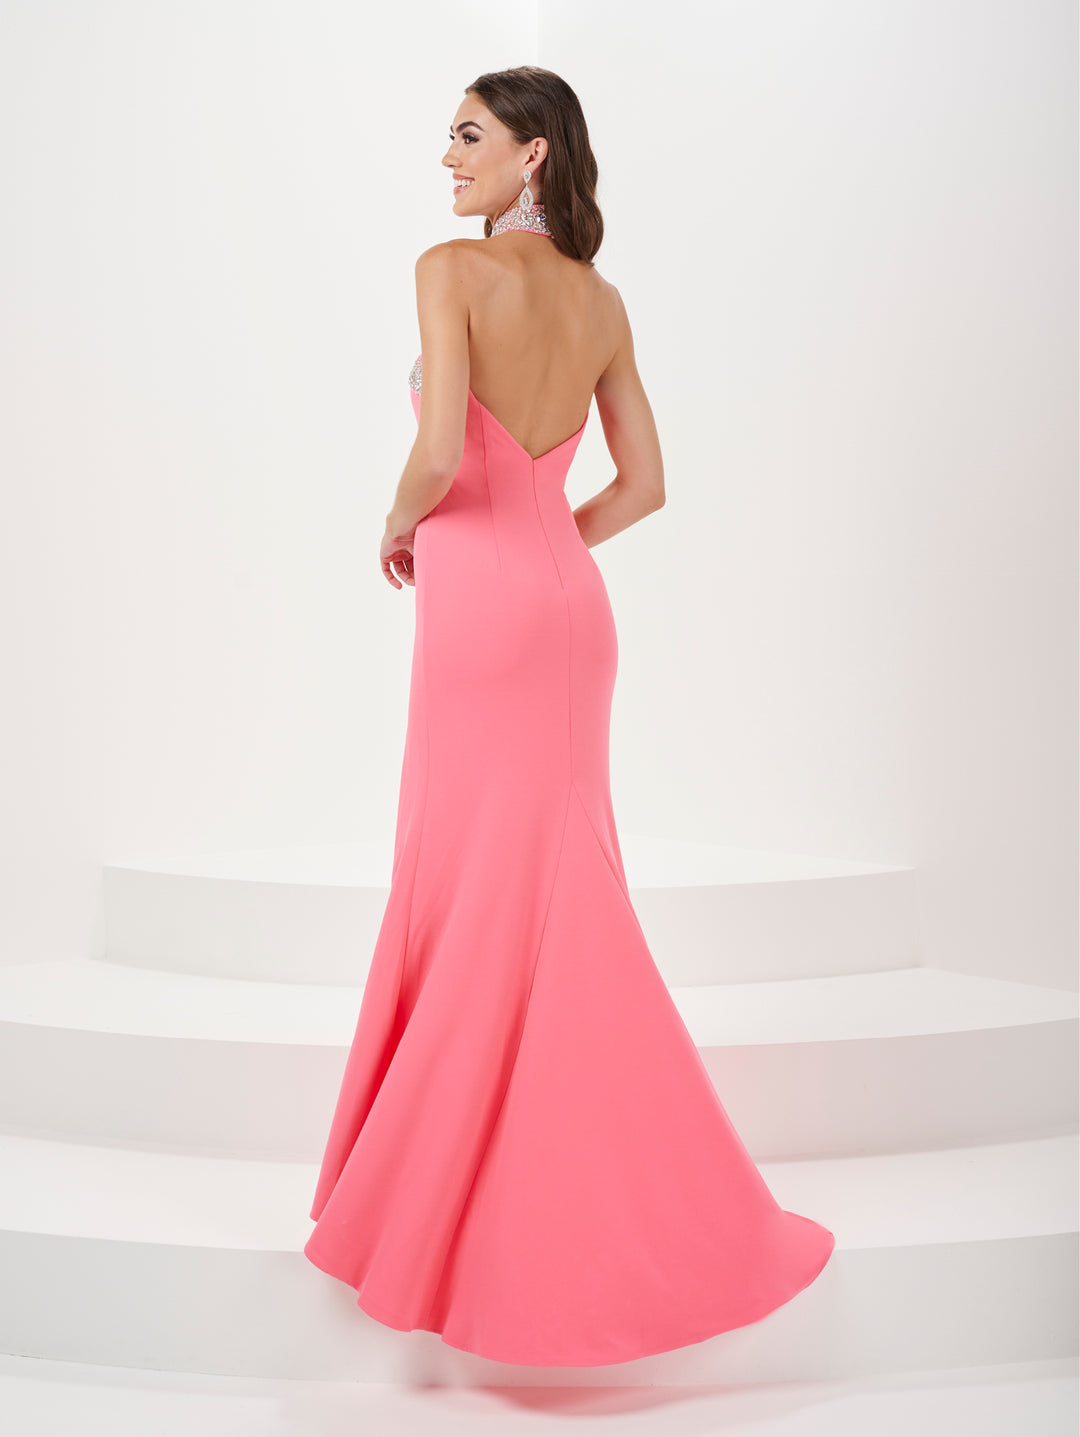 Beaded Jersey Halter Choker Slit Gown by Panoply 14159